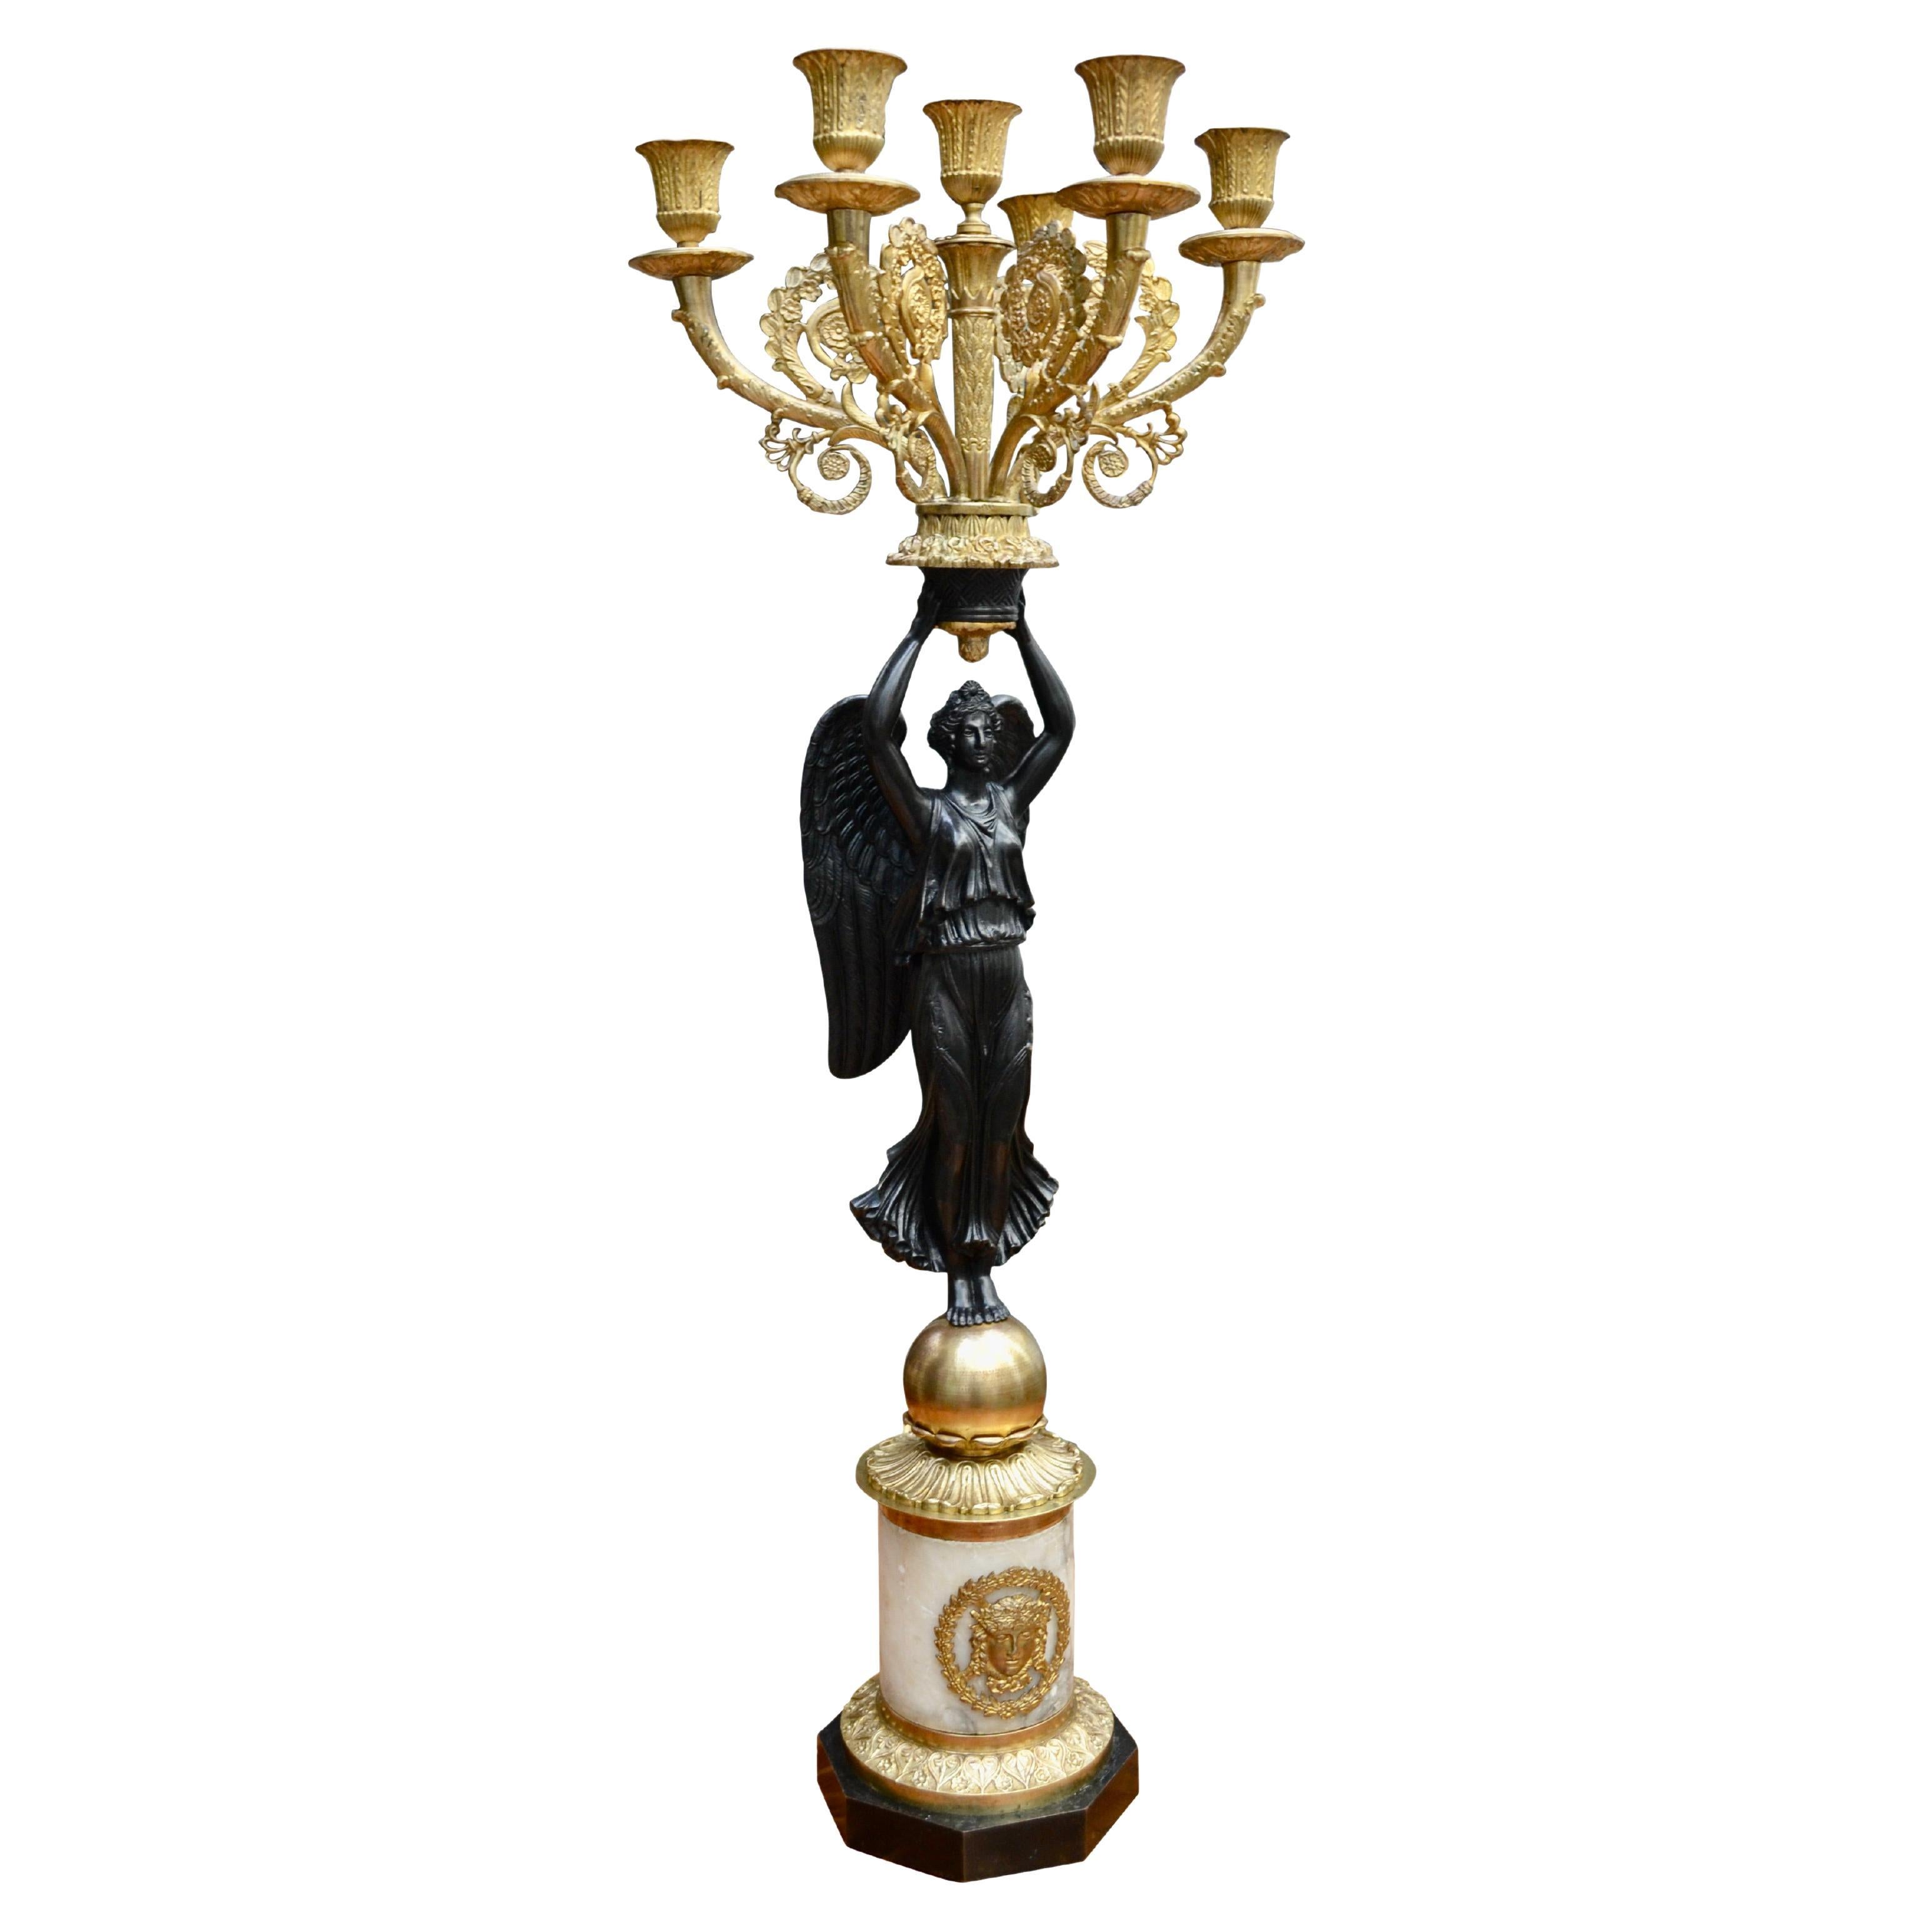 Single French Empire Style Patinated  and Gilt Bronze Winged Victory Candelabra